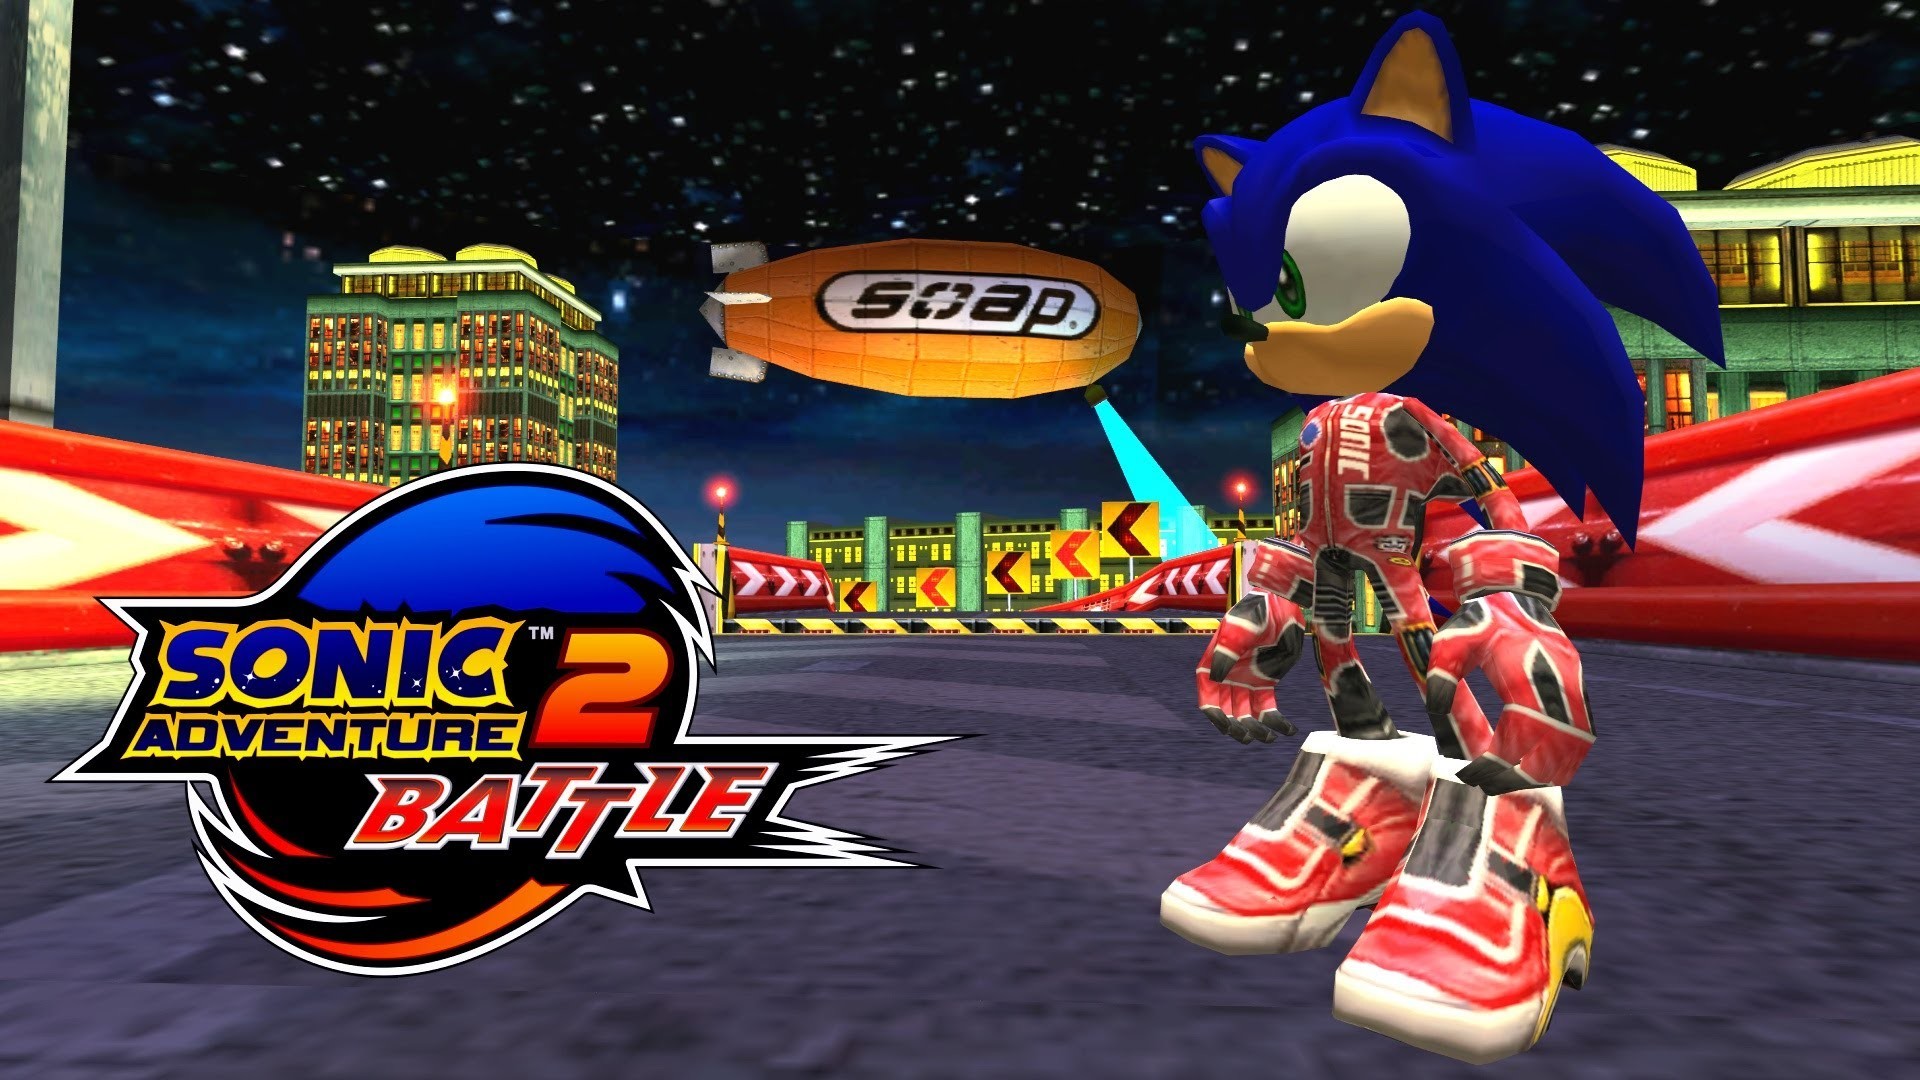 Sonic Adventure 2 SA2 Main Menu background wallpaper Mobile fits  iPhone standards Picture downloaded and edited  rSonicTheHedgehog